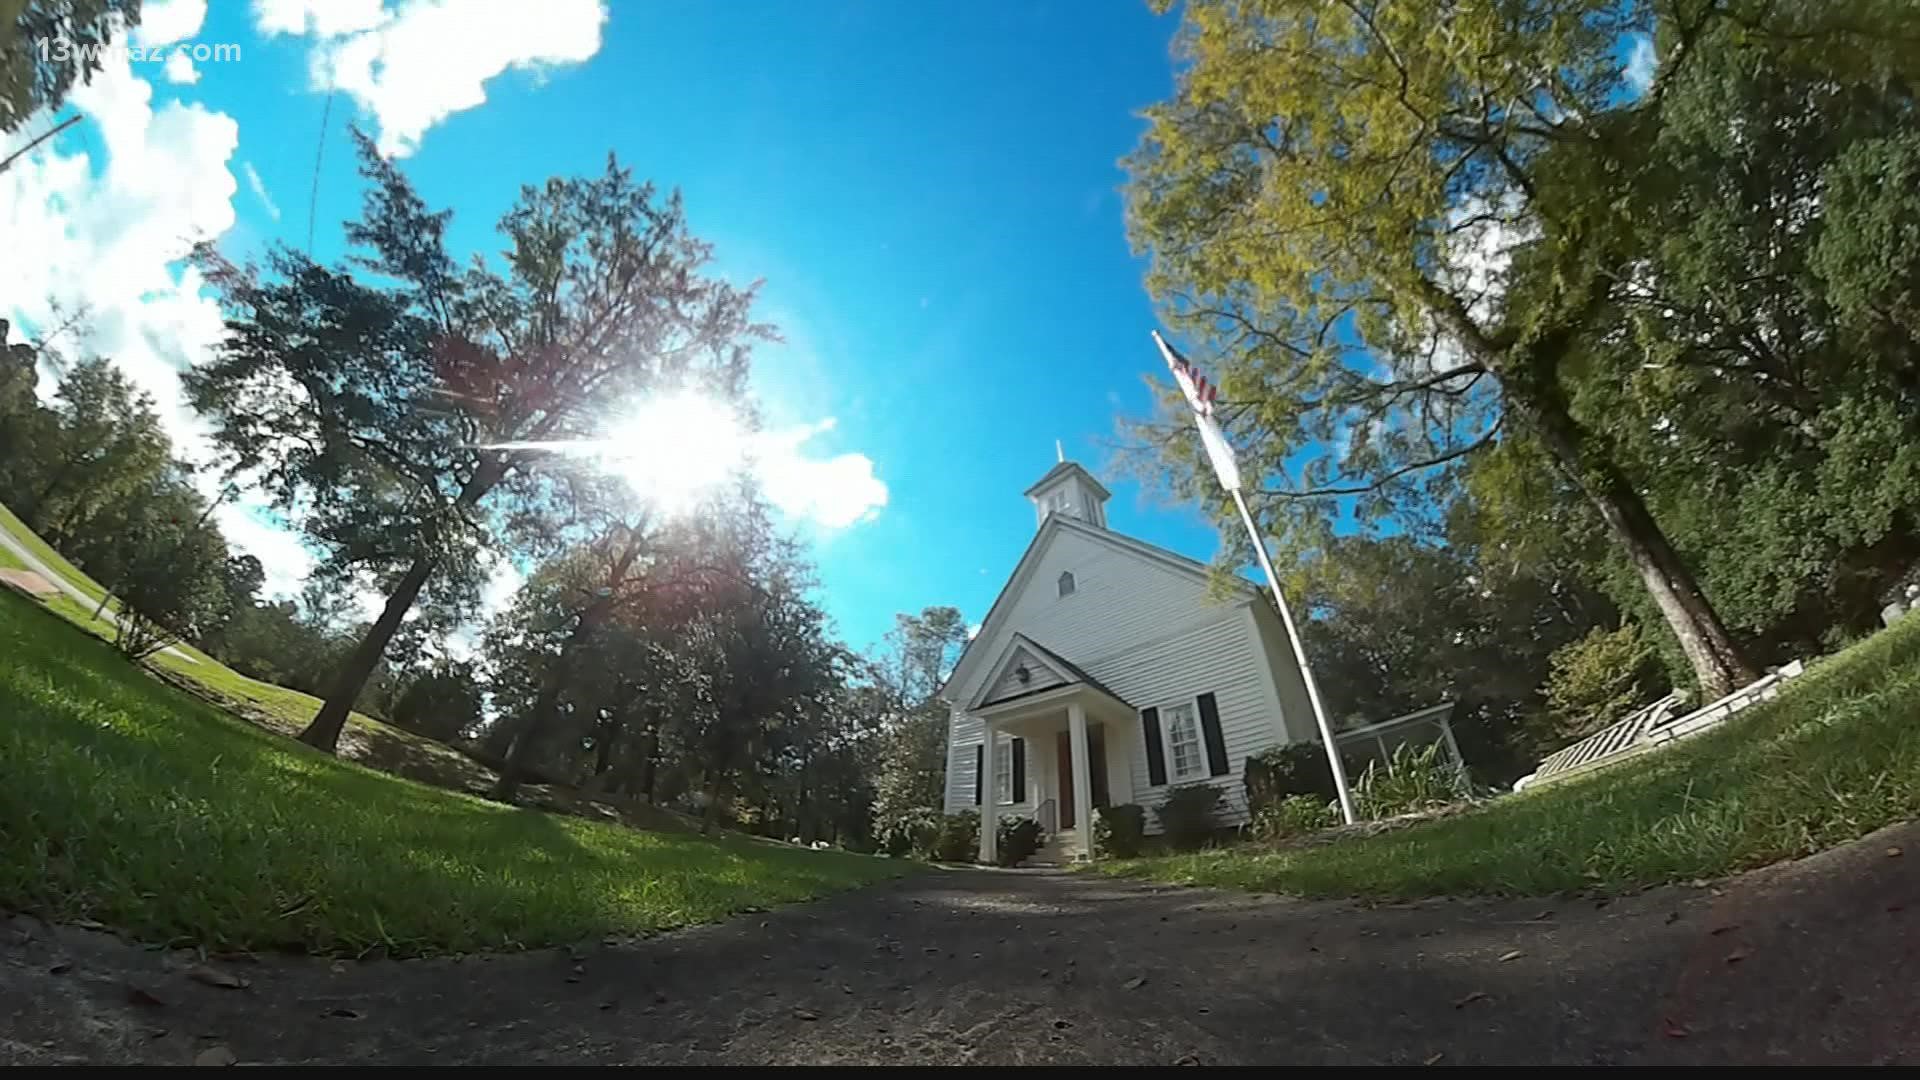 Life looked very different over 100 years ago, but Clinton Methodist Church has withstood the test of time.